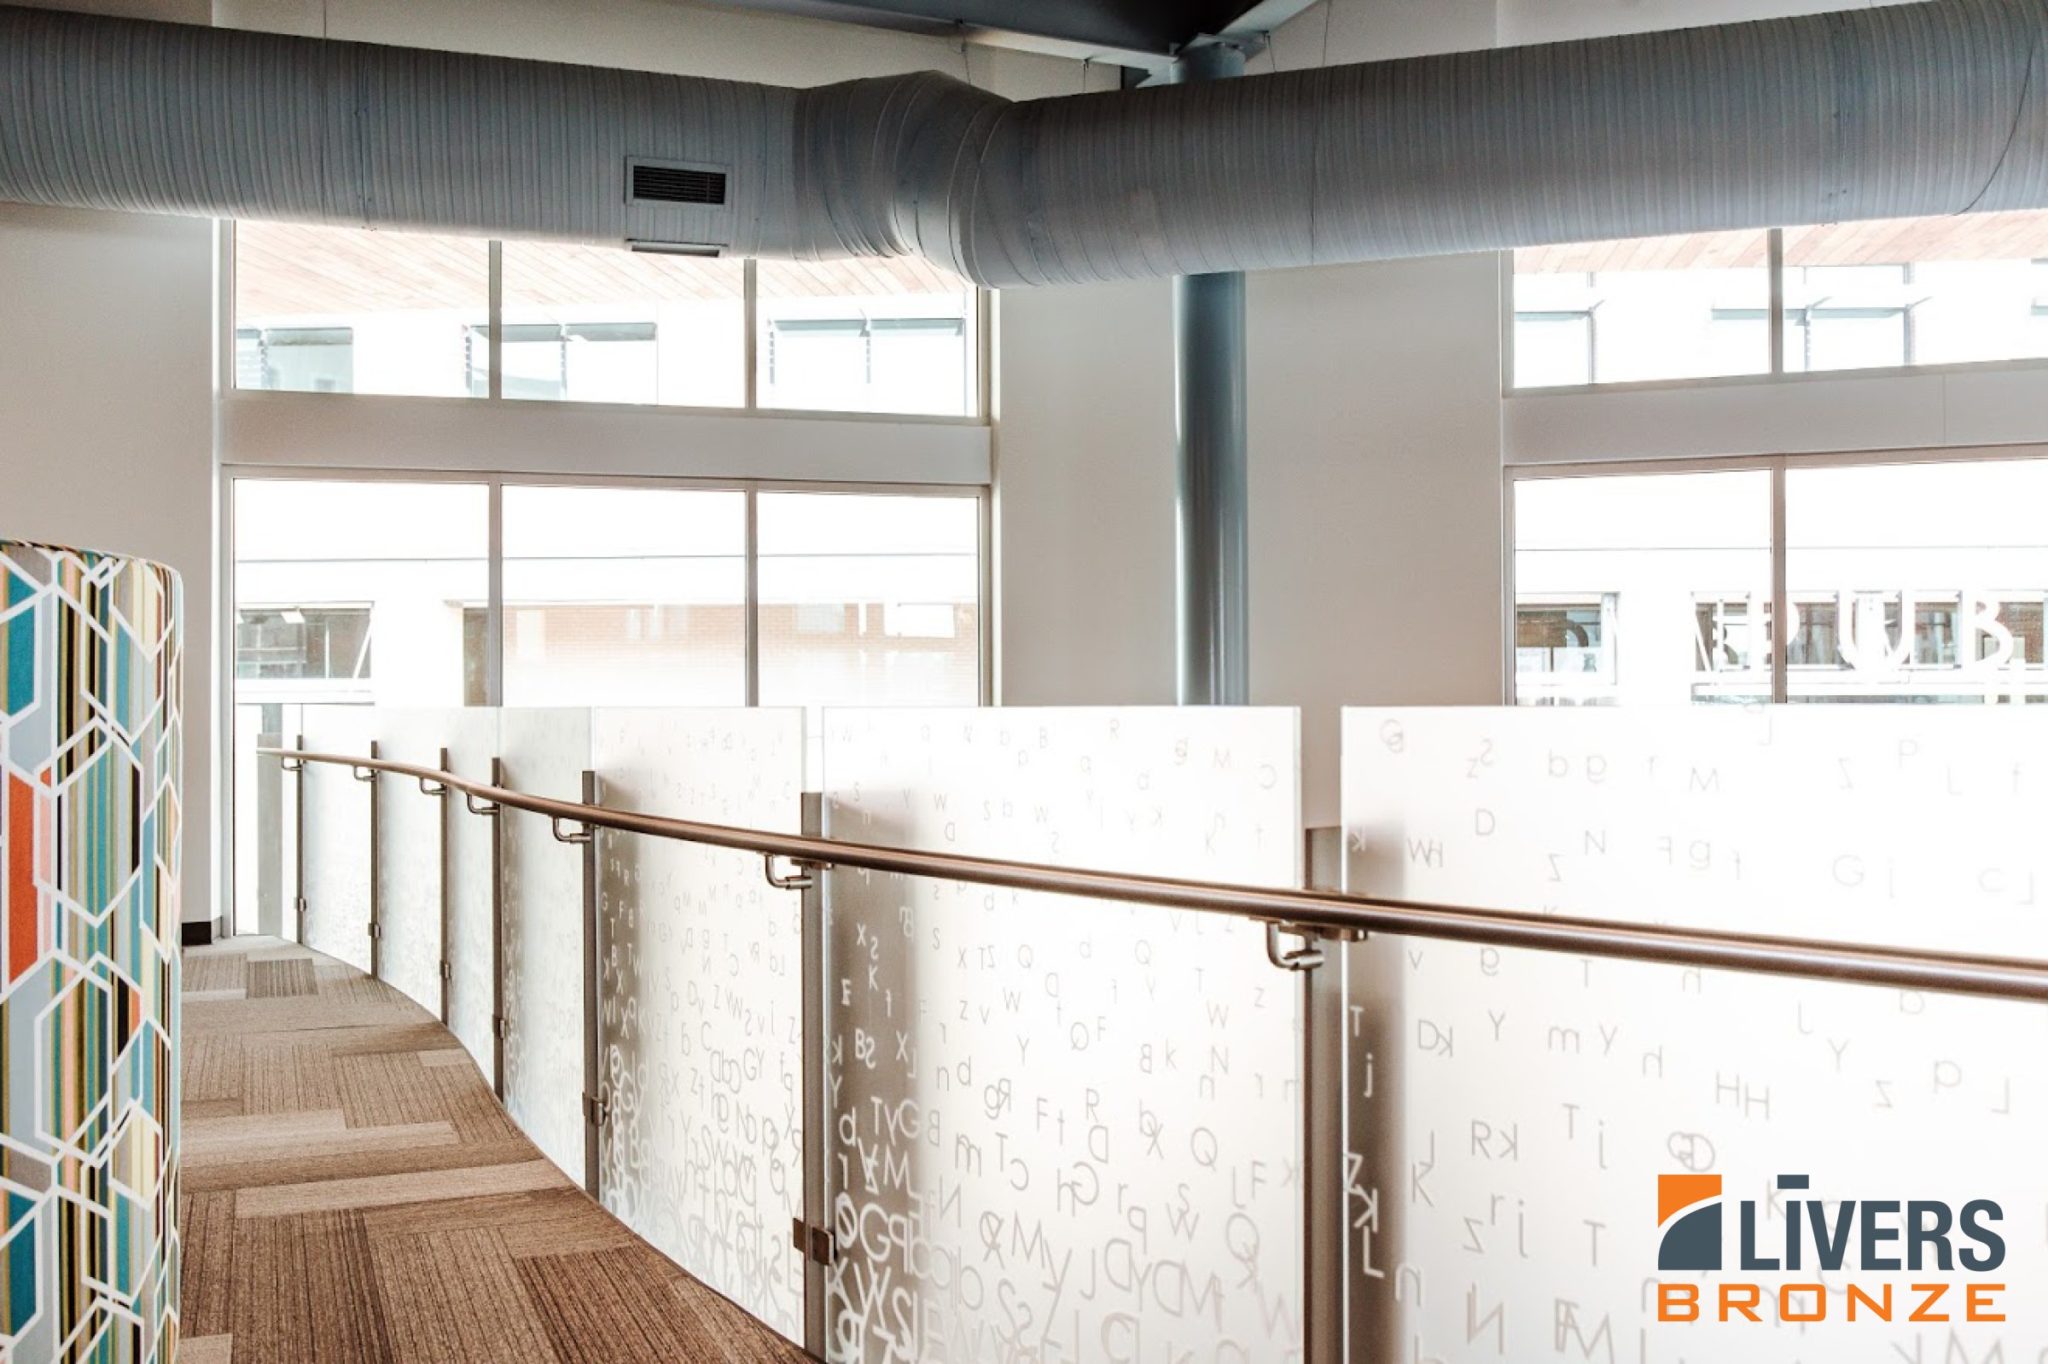 Livers Bronze Decorative Stainless Steel Railings with Steel Posts and Clear Tempered Glass Panels were installed at the interior balcony at the Lenexa City Center Library and were Made in the USA